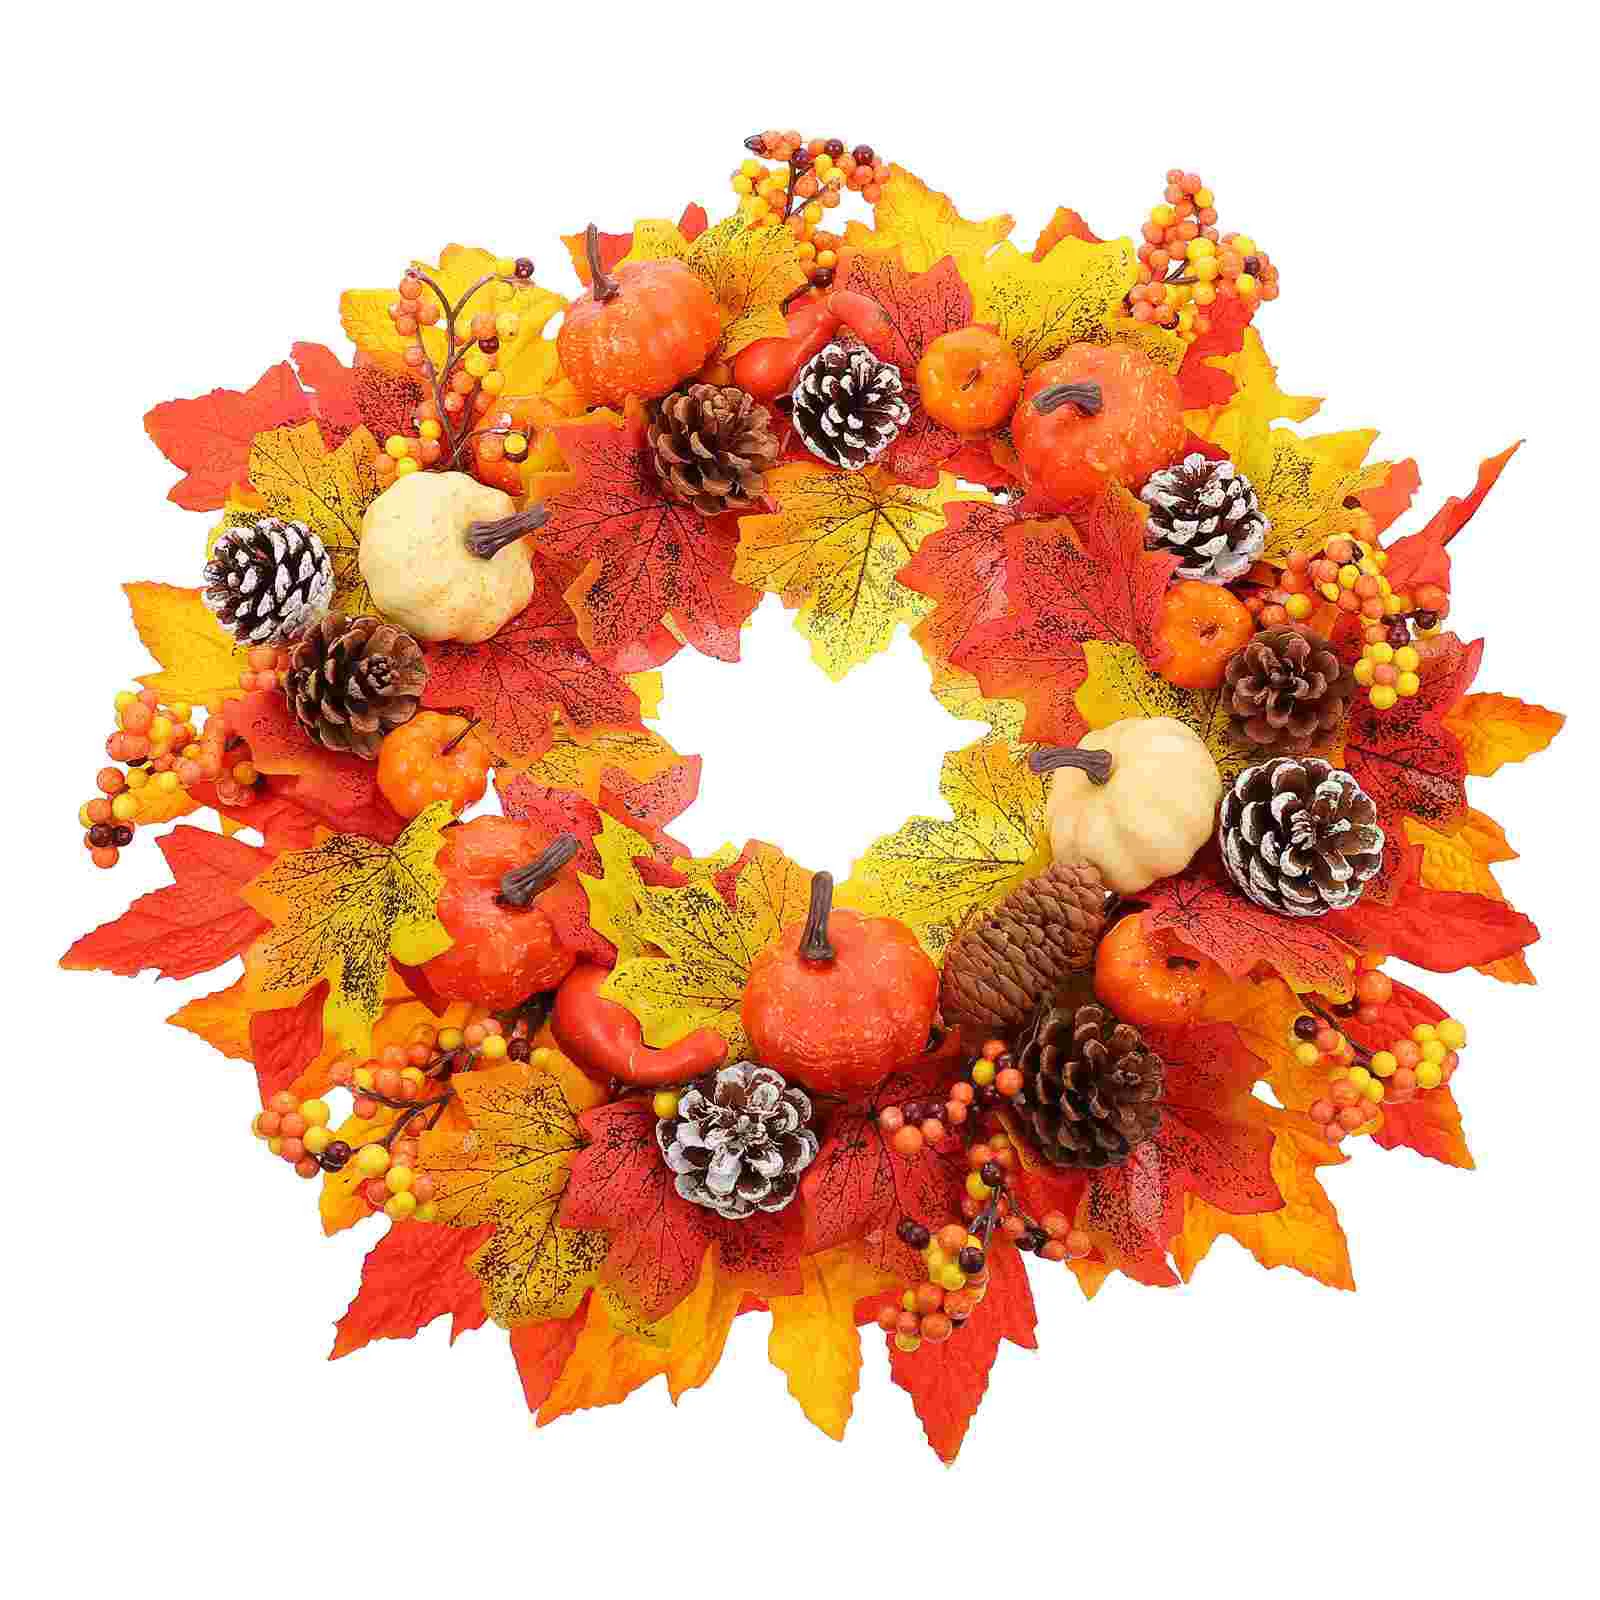 

Summer Decorations Home Halloween Wreath Fake Maple Leaf Simulated Hanging Door Garland Party Artificial Adornment